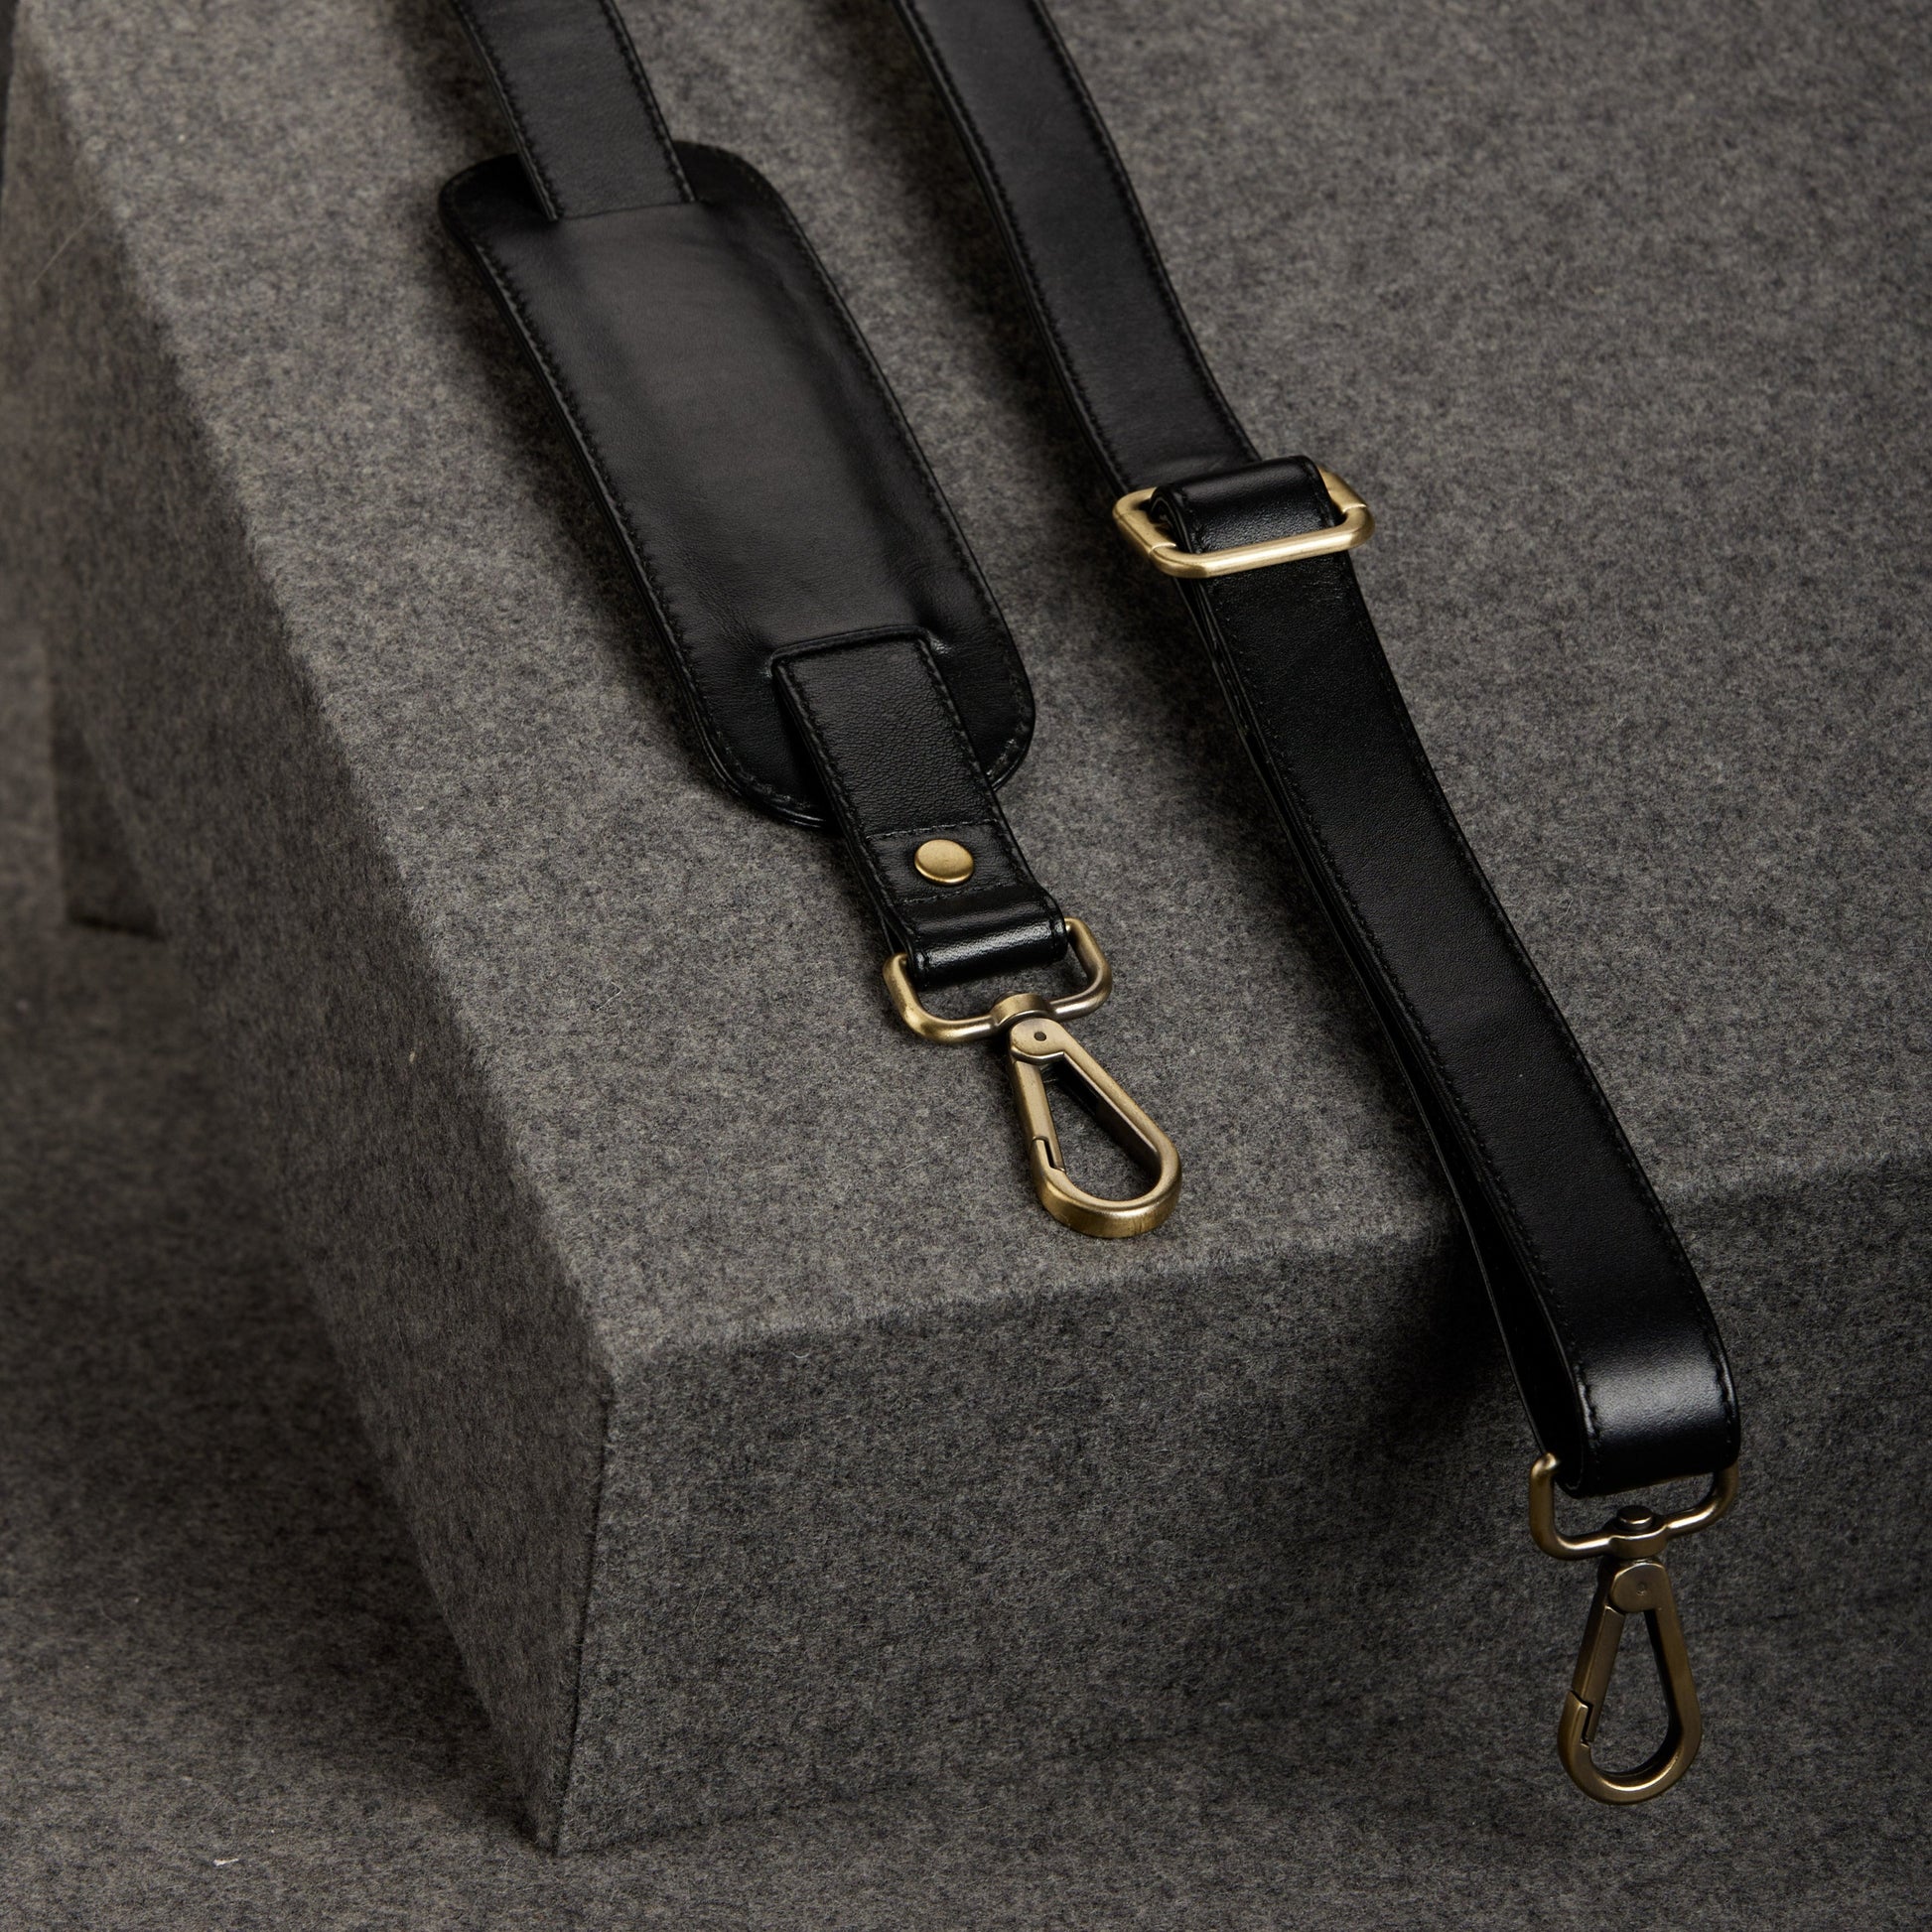 Leather shoulder strap that is adjustable and padded